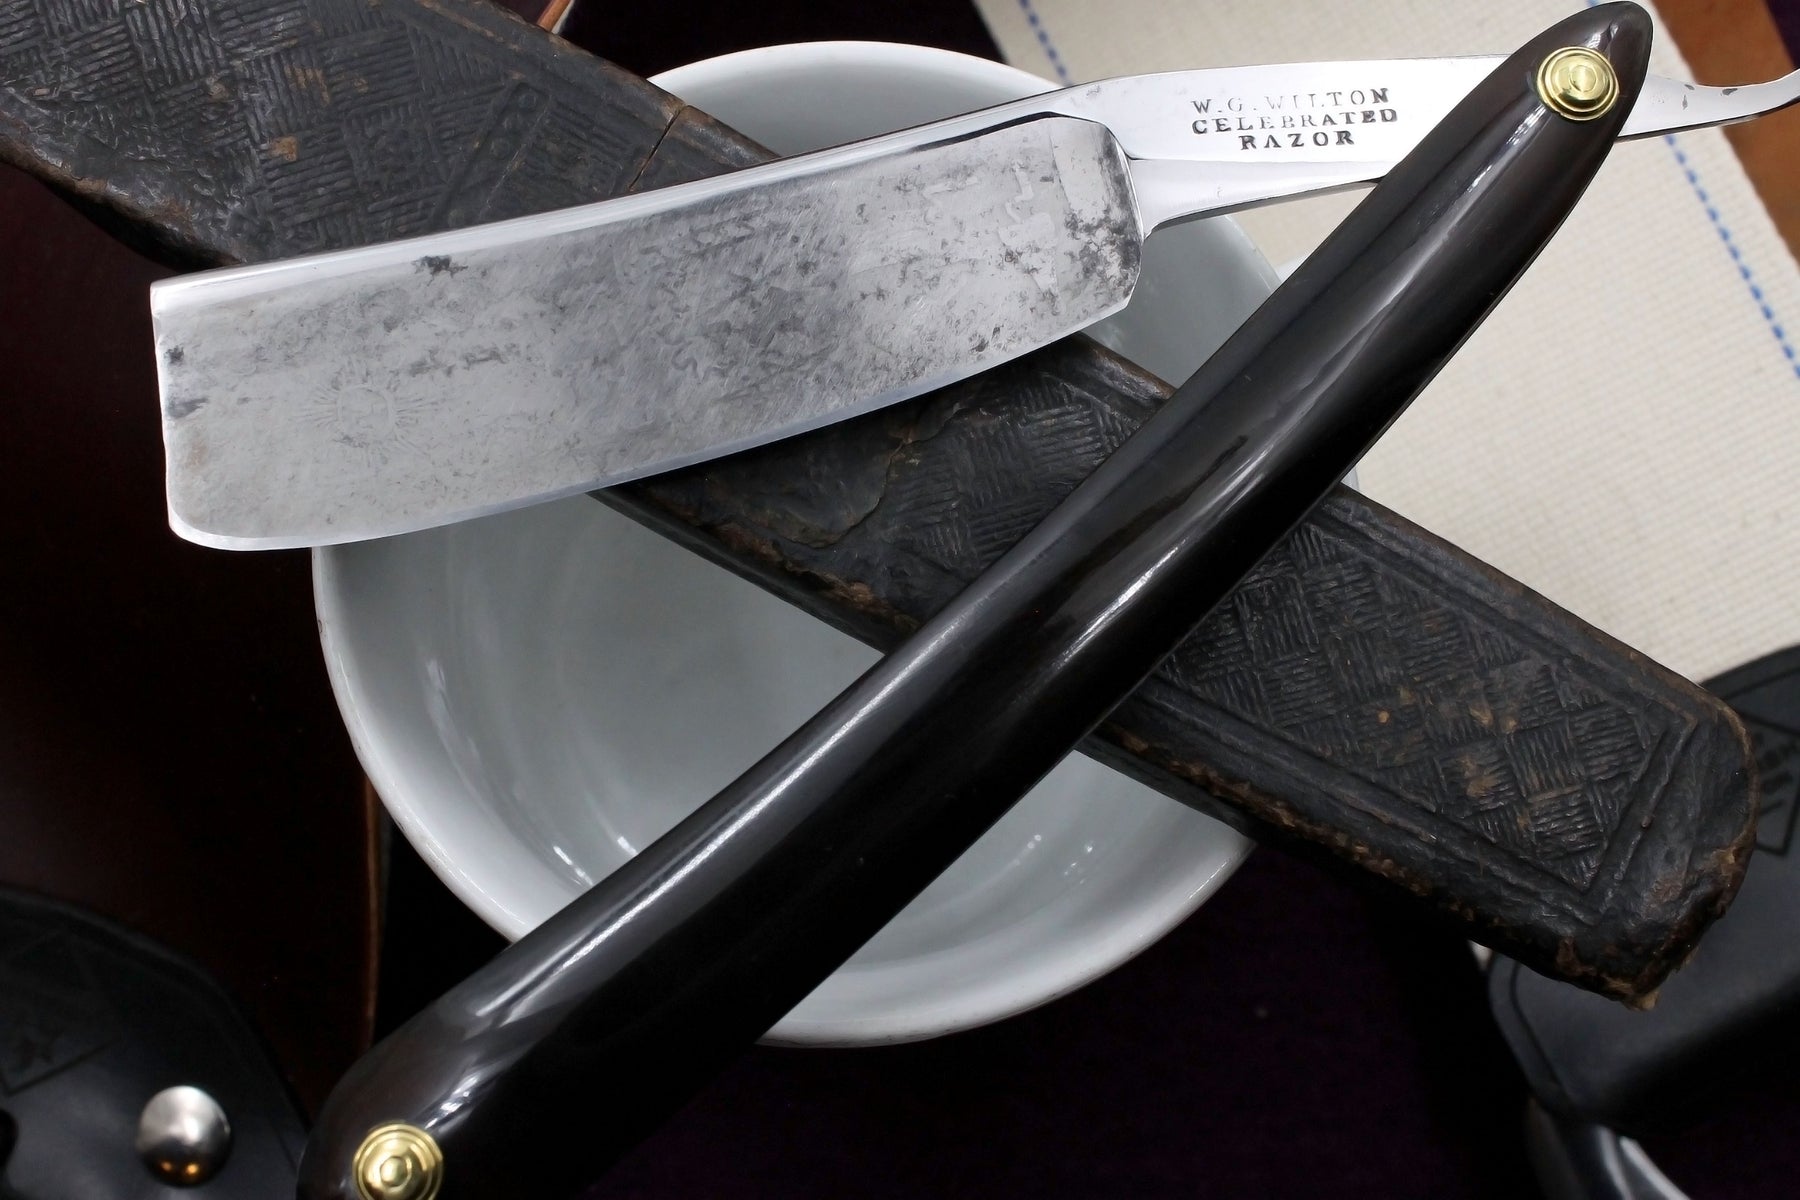 W.G. Wilton Celebrated Razor 1" 8/8 Masonic Etched Blade with Original Horn Scales - Vintage Sheffield Straight Razor - Fully Restored & Shave Ready